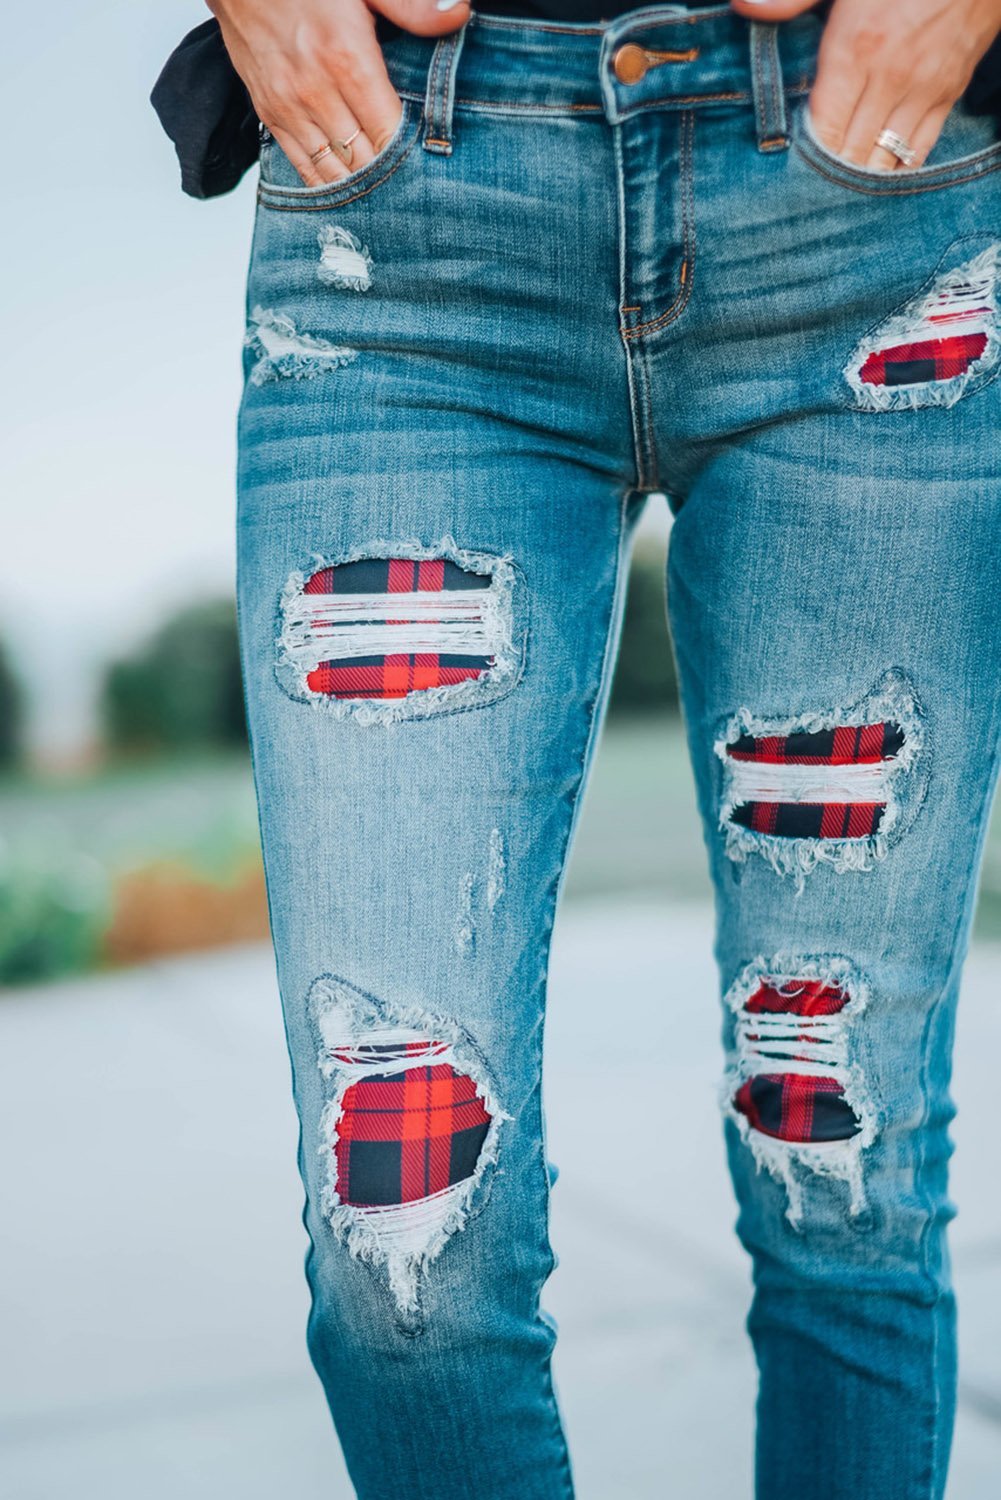 Women's Fashion Red Plaid Patch Destroyed Skinny Jeans